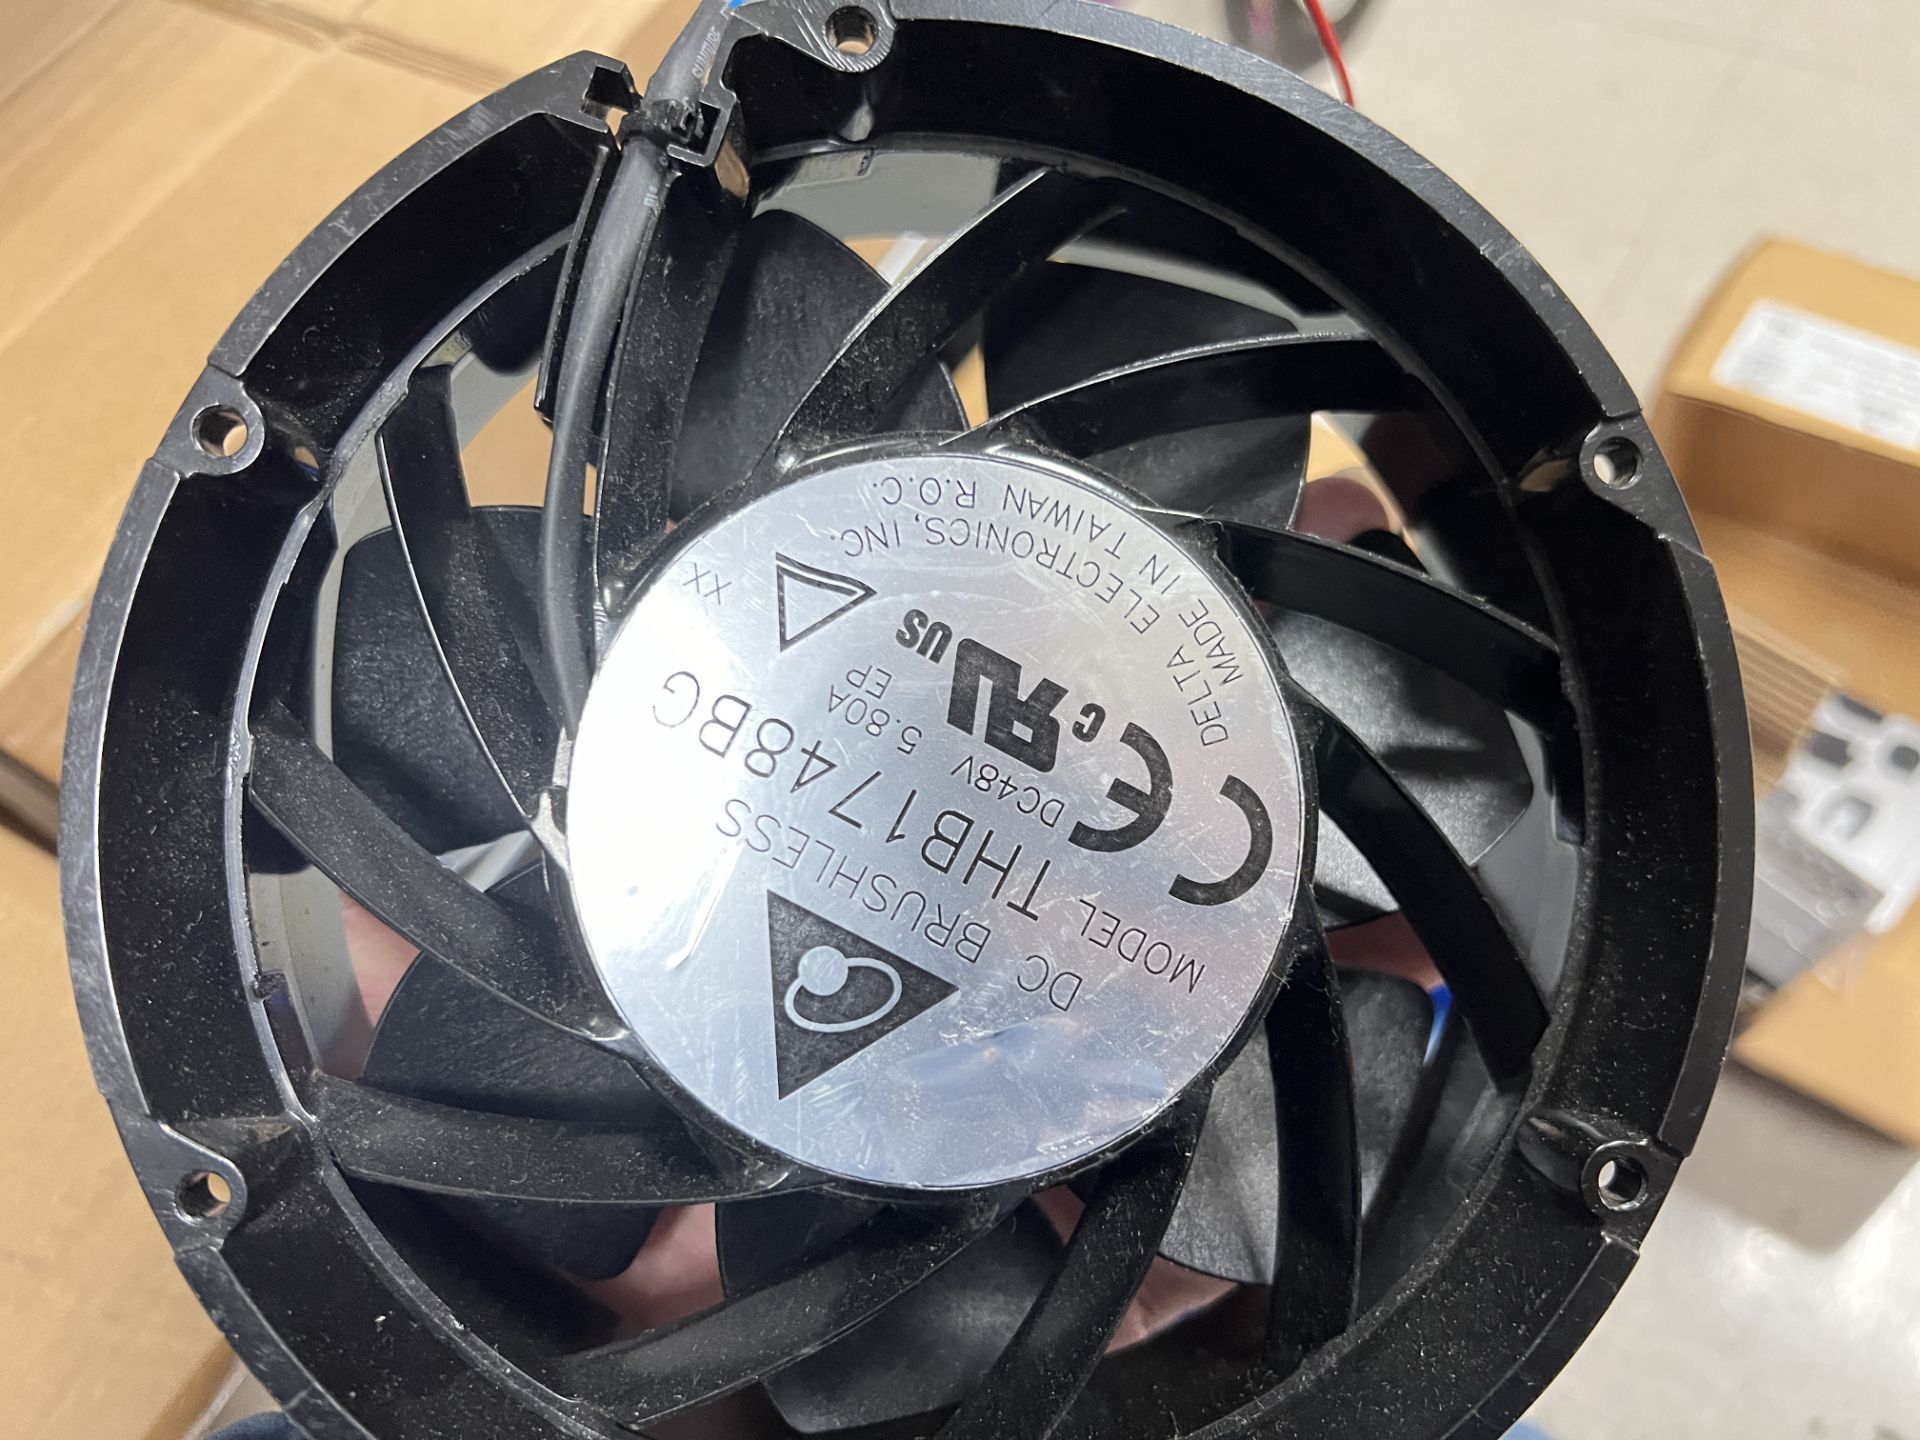 Axial Fans /DC Cooling Fans - Image 18 of 20